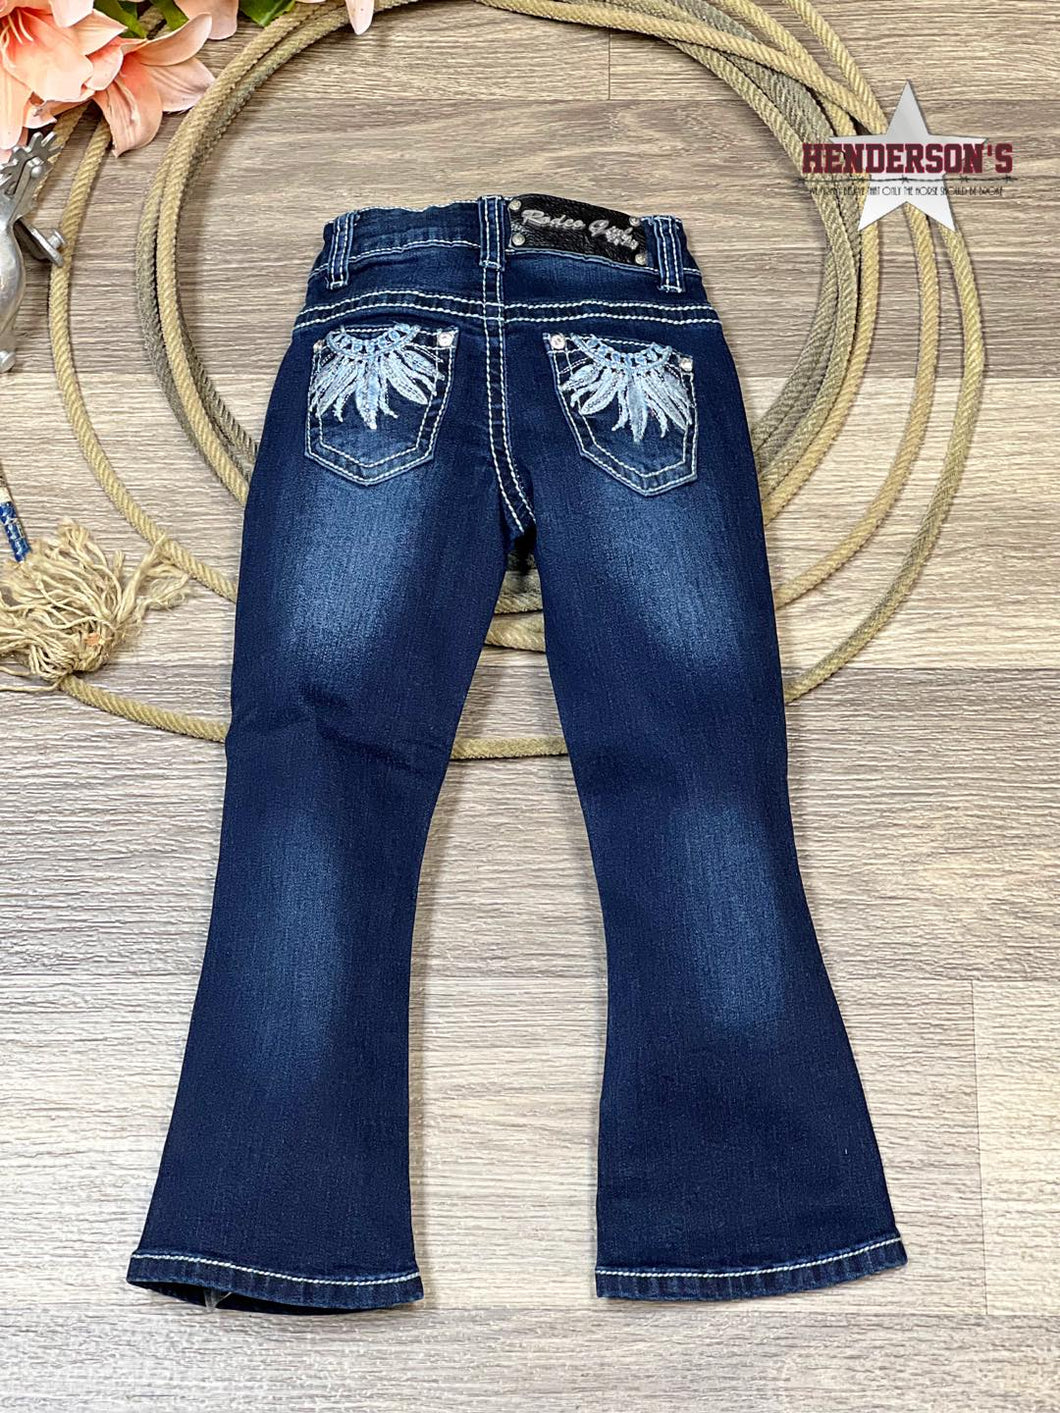 Rodeo Girl by Liz Jeans ~ Blue Feather - Henderson's Western Store